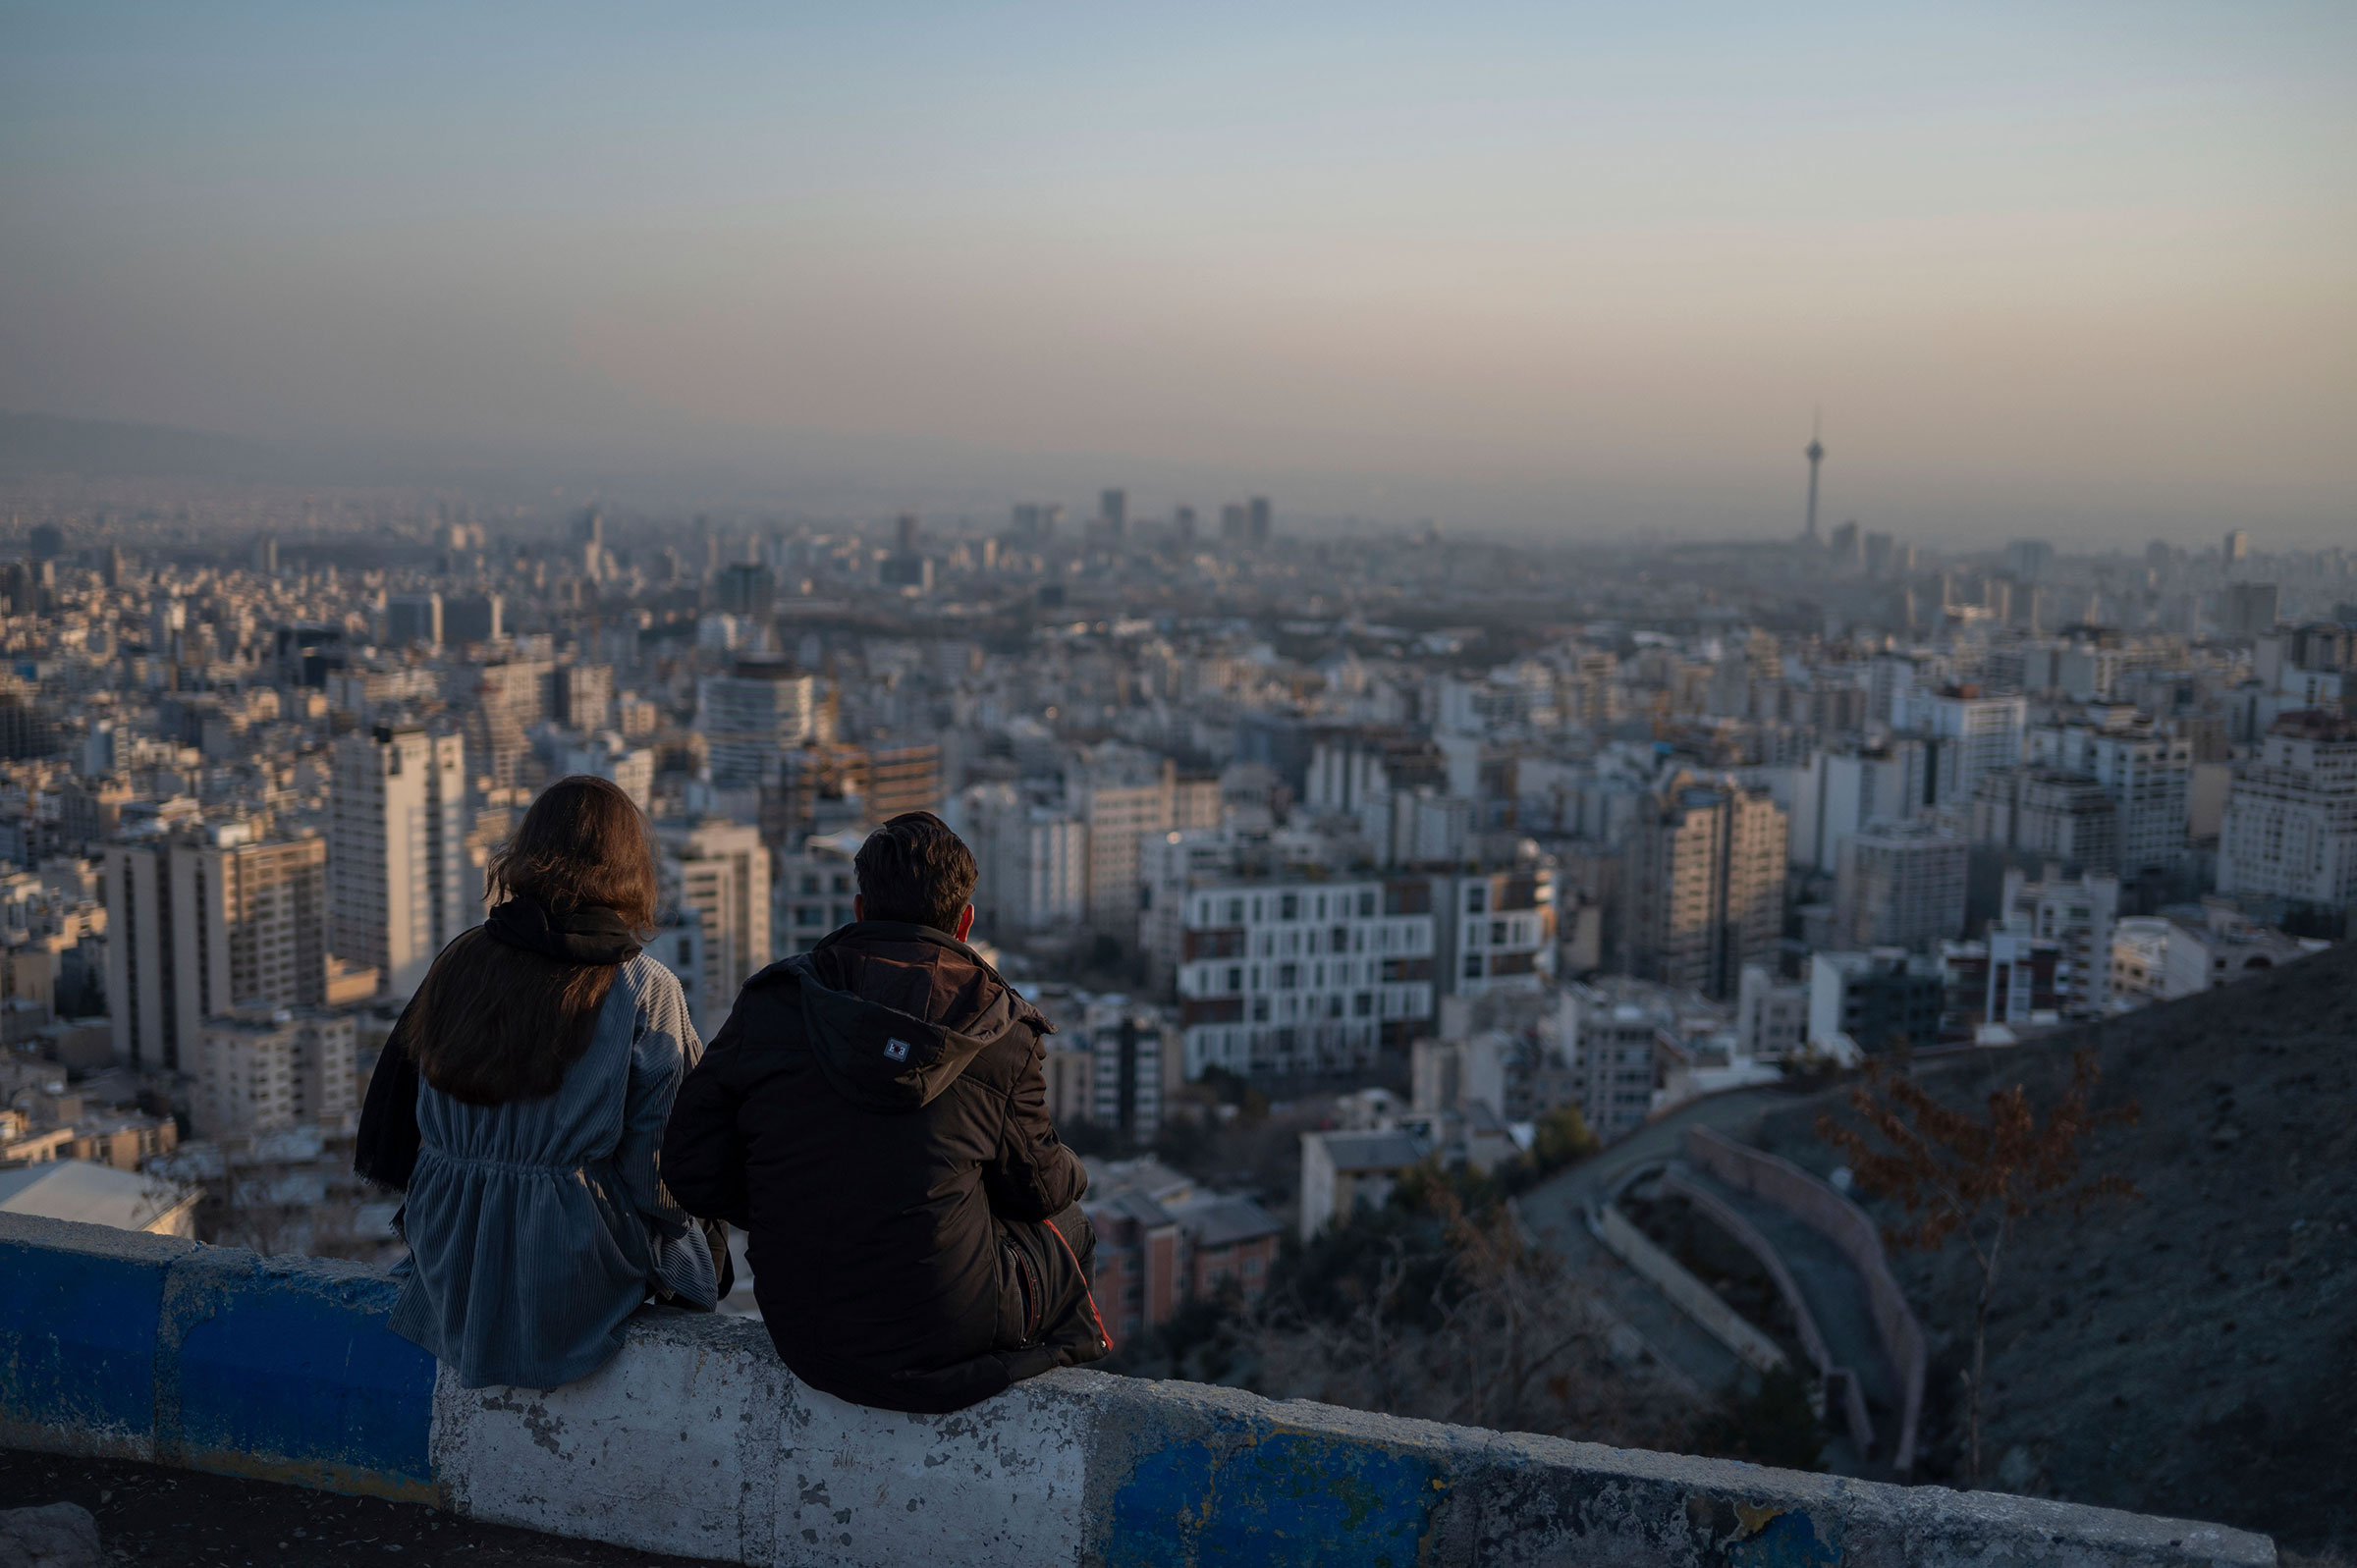 A couple sits at a popular scenic destination overlooking Tehran. (Arne Immanuel B'nsch—picture-alliance/dpa/AP)